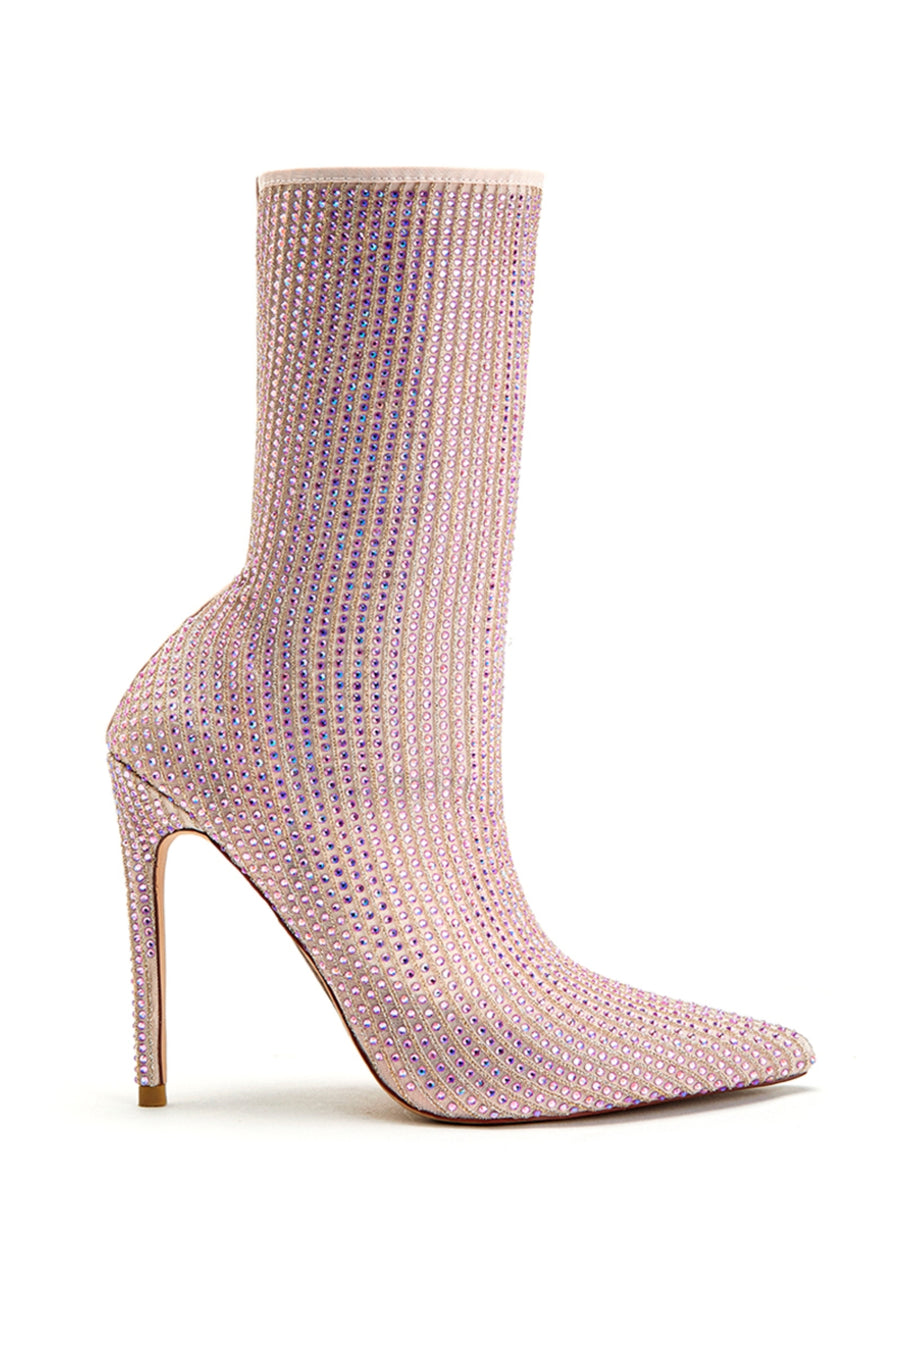 baby pink pointed toe heel boots with a tight fit and rhinestone embellishment